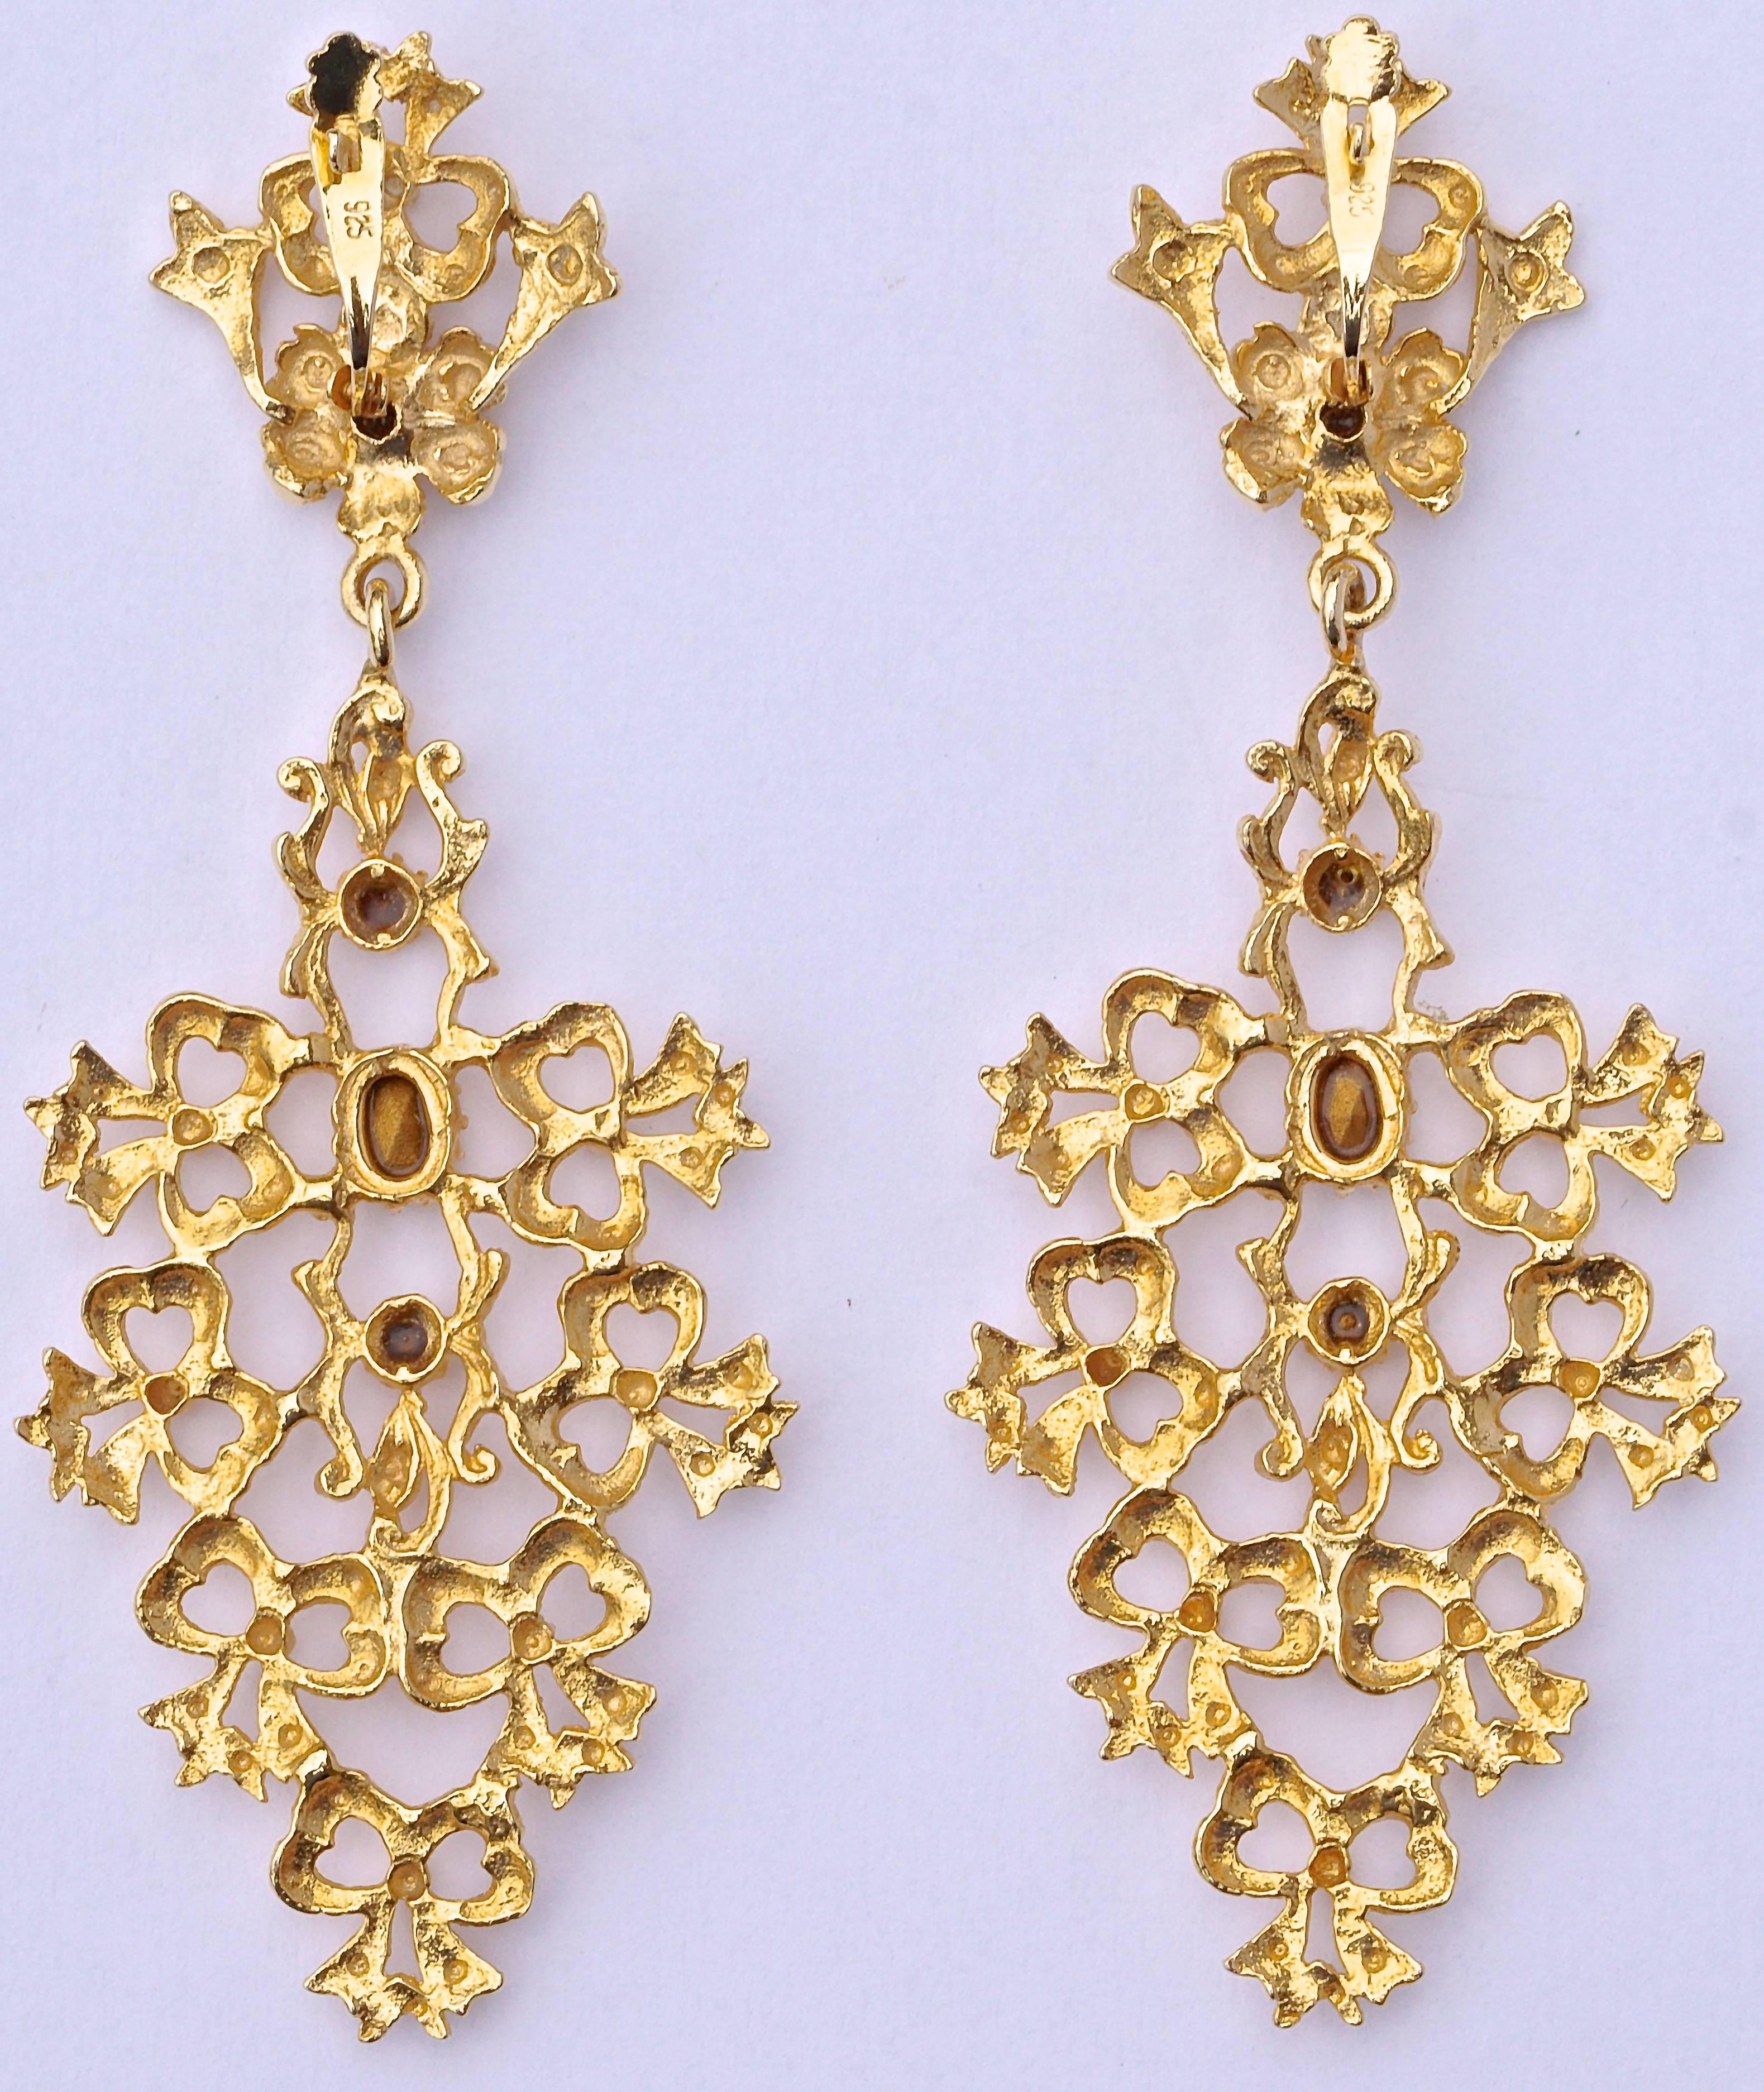 Gold tone chandelier earrings for pierced ears in an unusual bow design, and set with four clear faceted rhinestones. The top has a flower embellished with a rhinestone. Length 8.2cm / 3.23 inches by maximum width 3.2cm / 1.26 inches. They are in